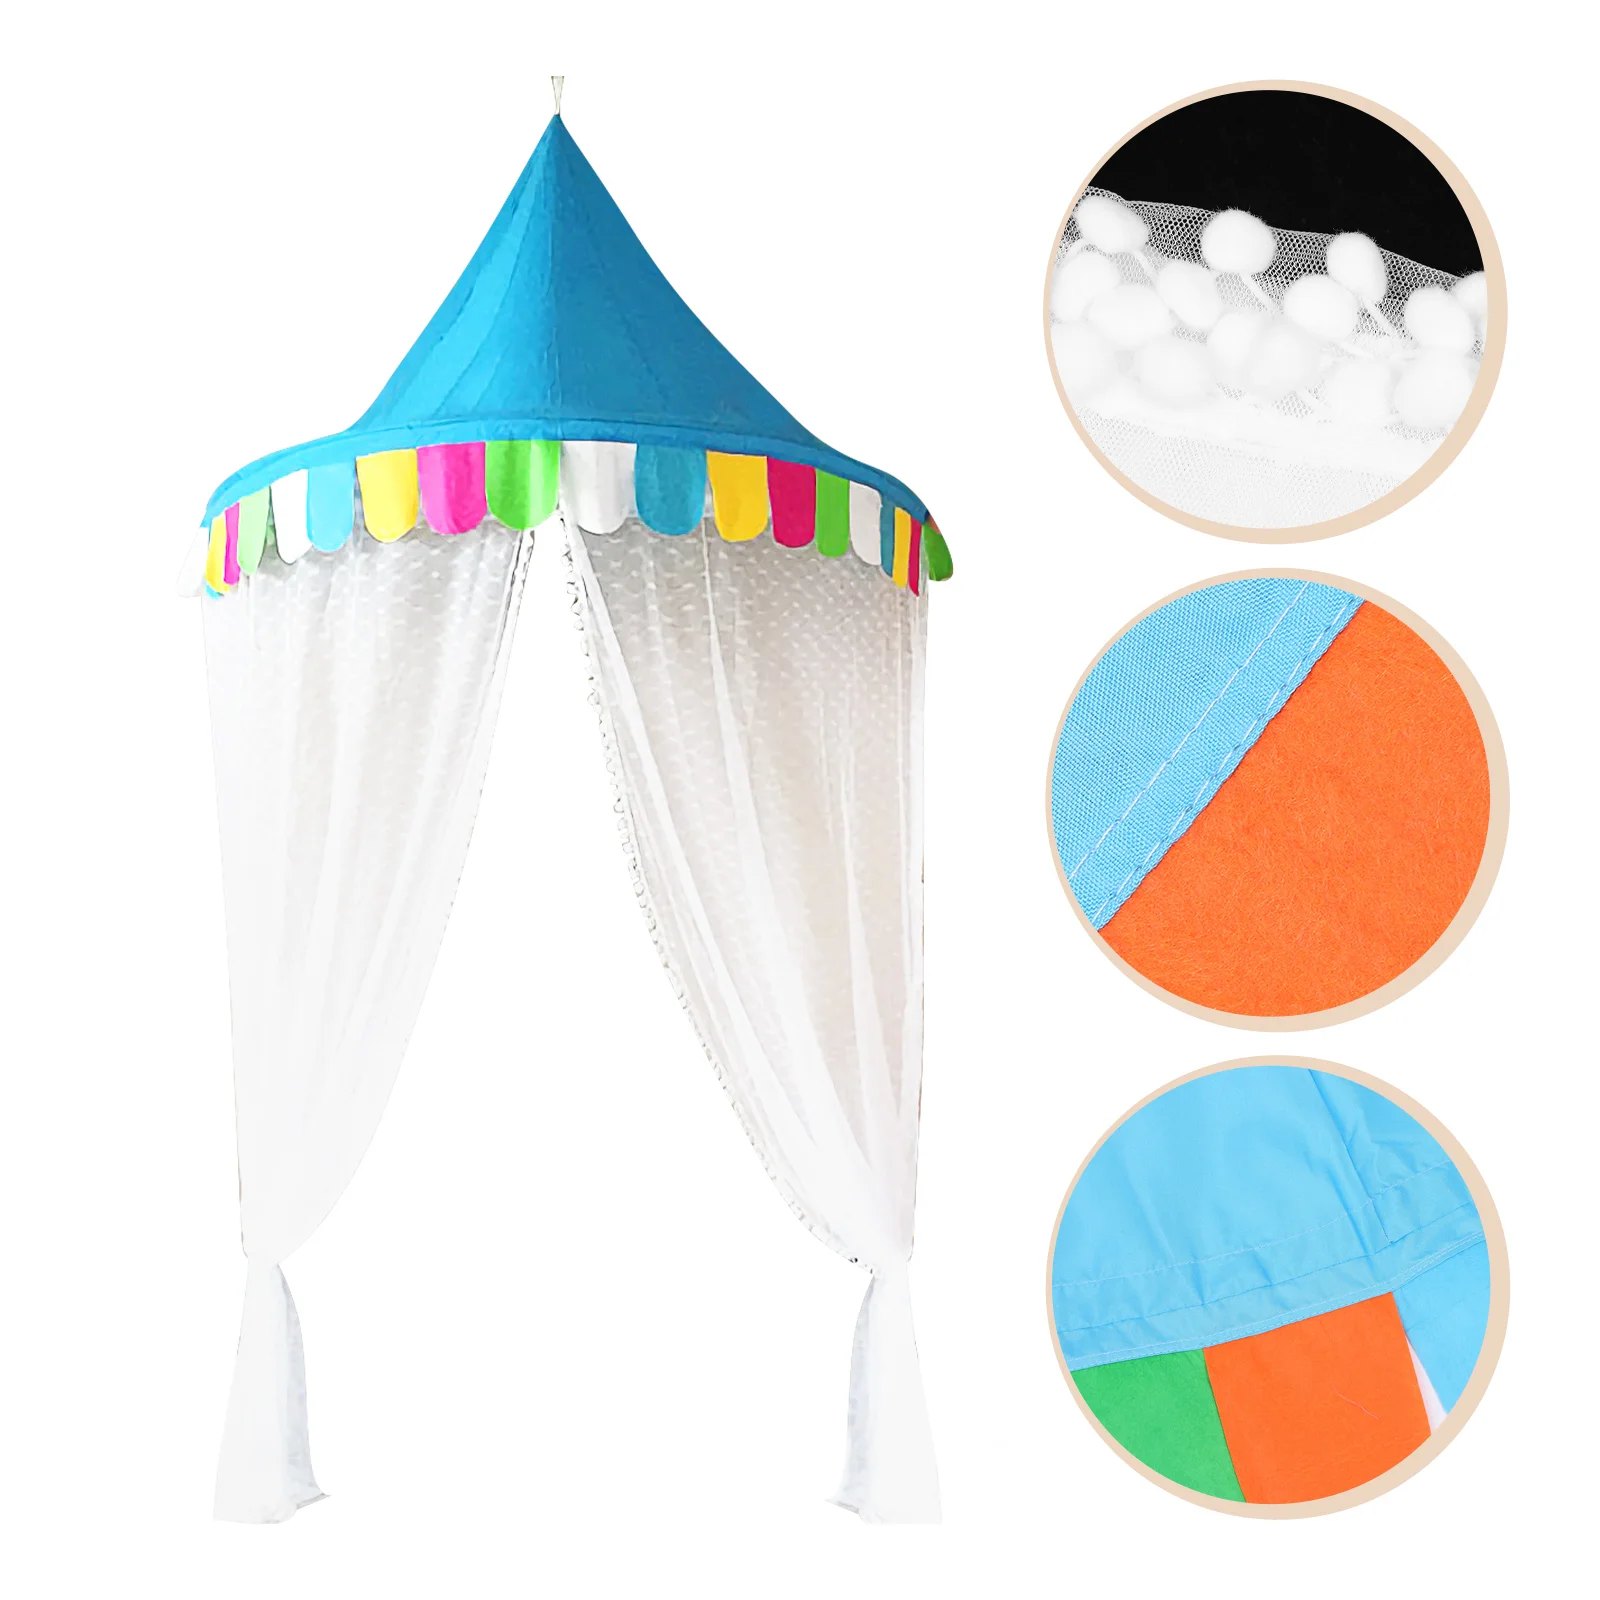 

Canopy Bed Net Bedroom Dome Girls Kids Room Netting Child Tent Curtains Toddler Nursery Curtain Crib Half Reading Children